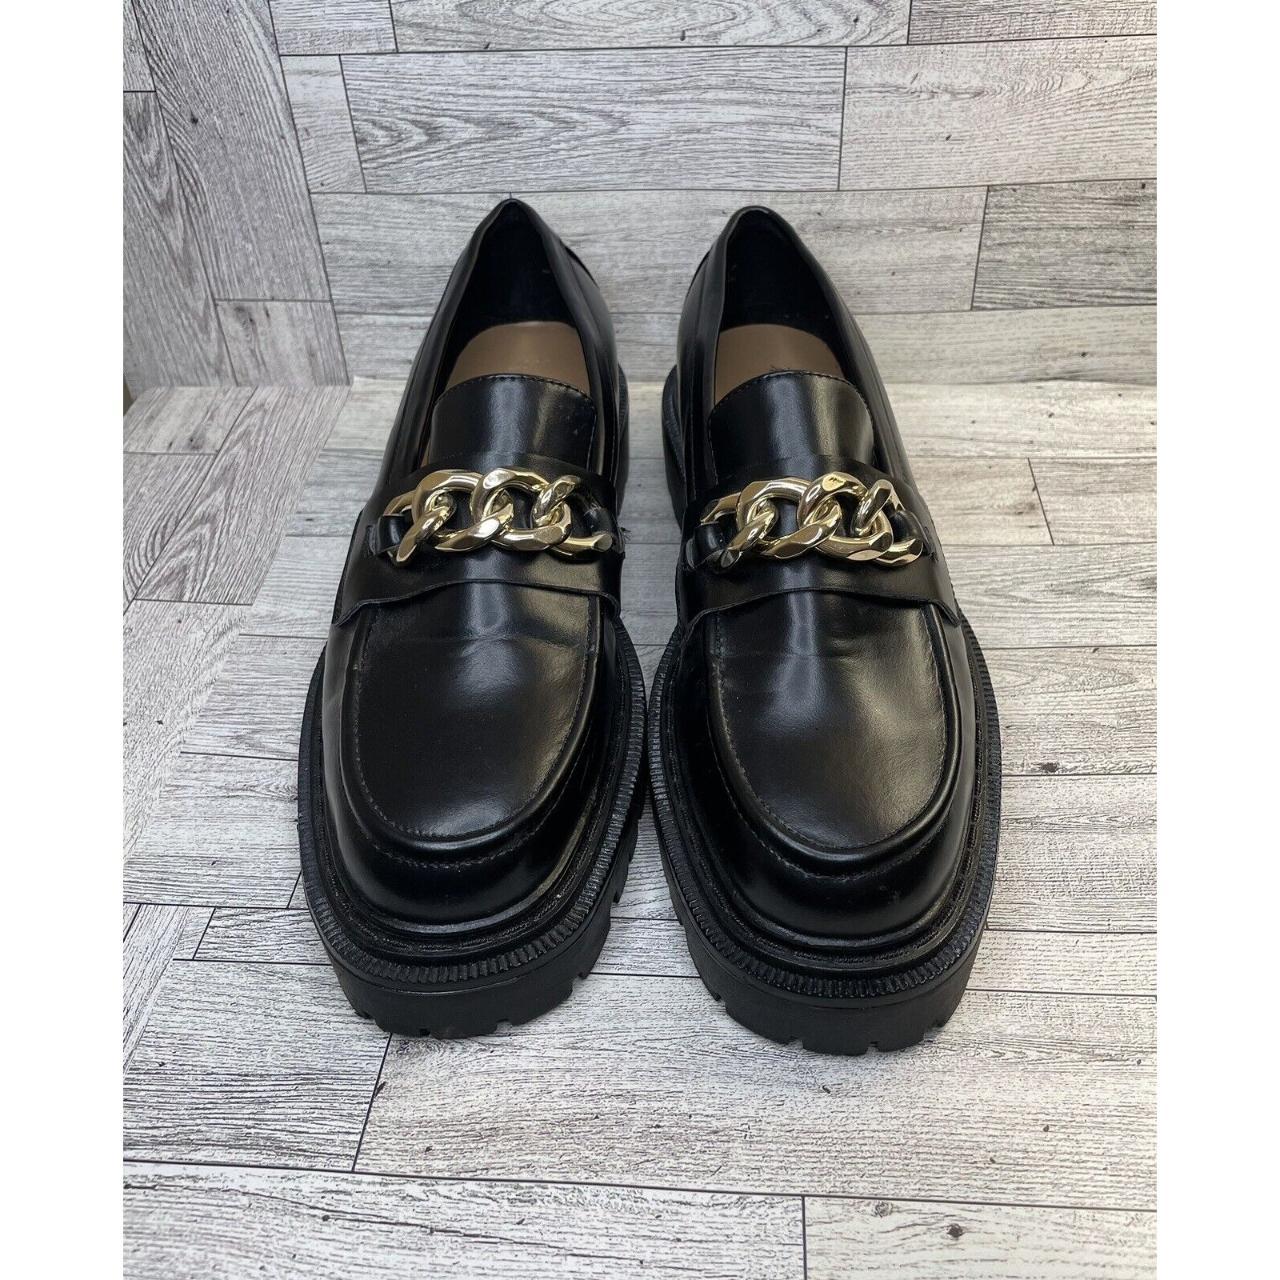 H&M Chunky Loafers Women's Size US 10 Chain Link... - Depop